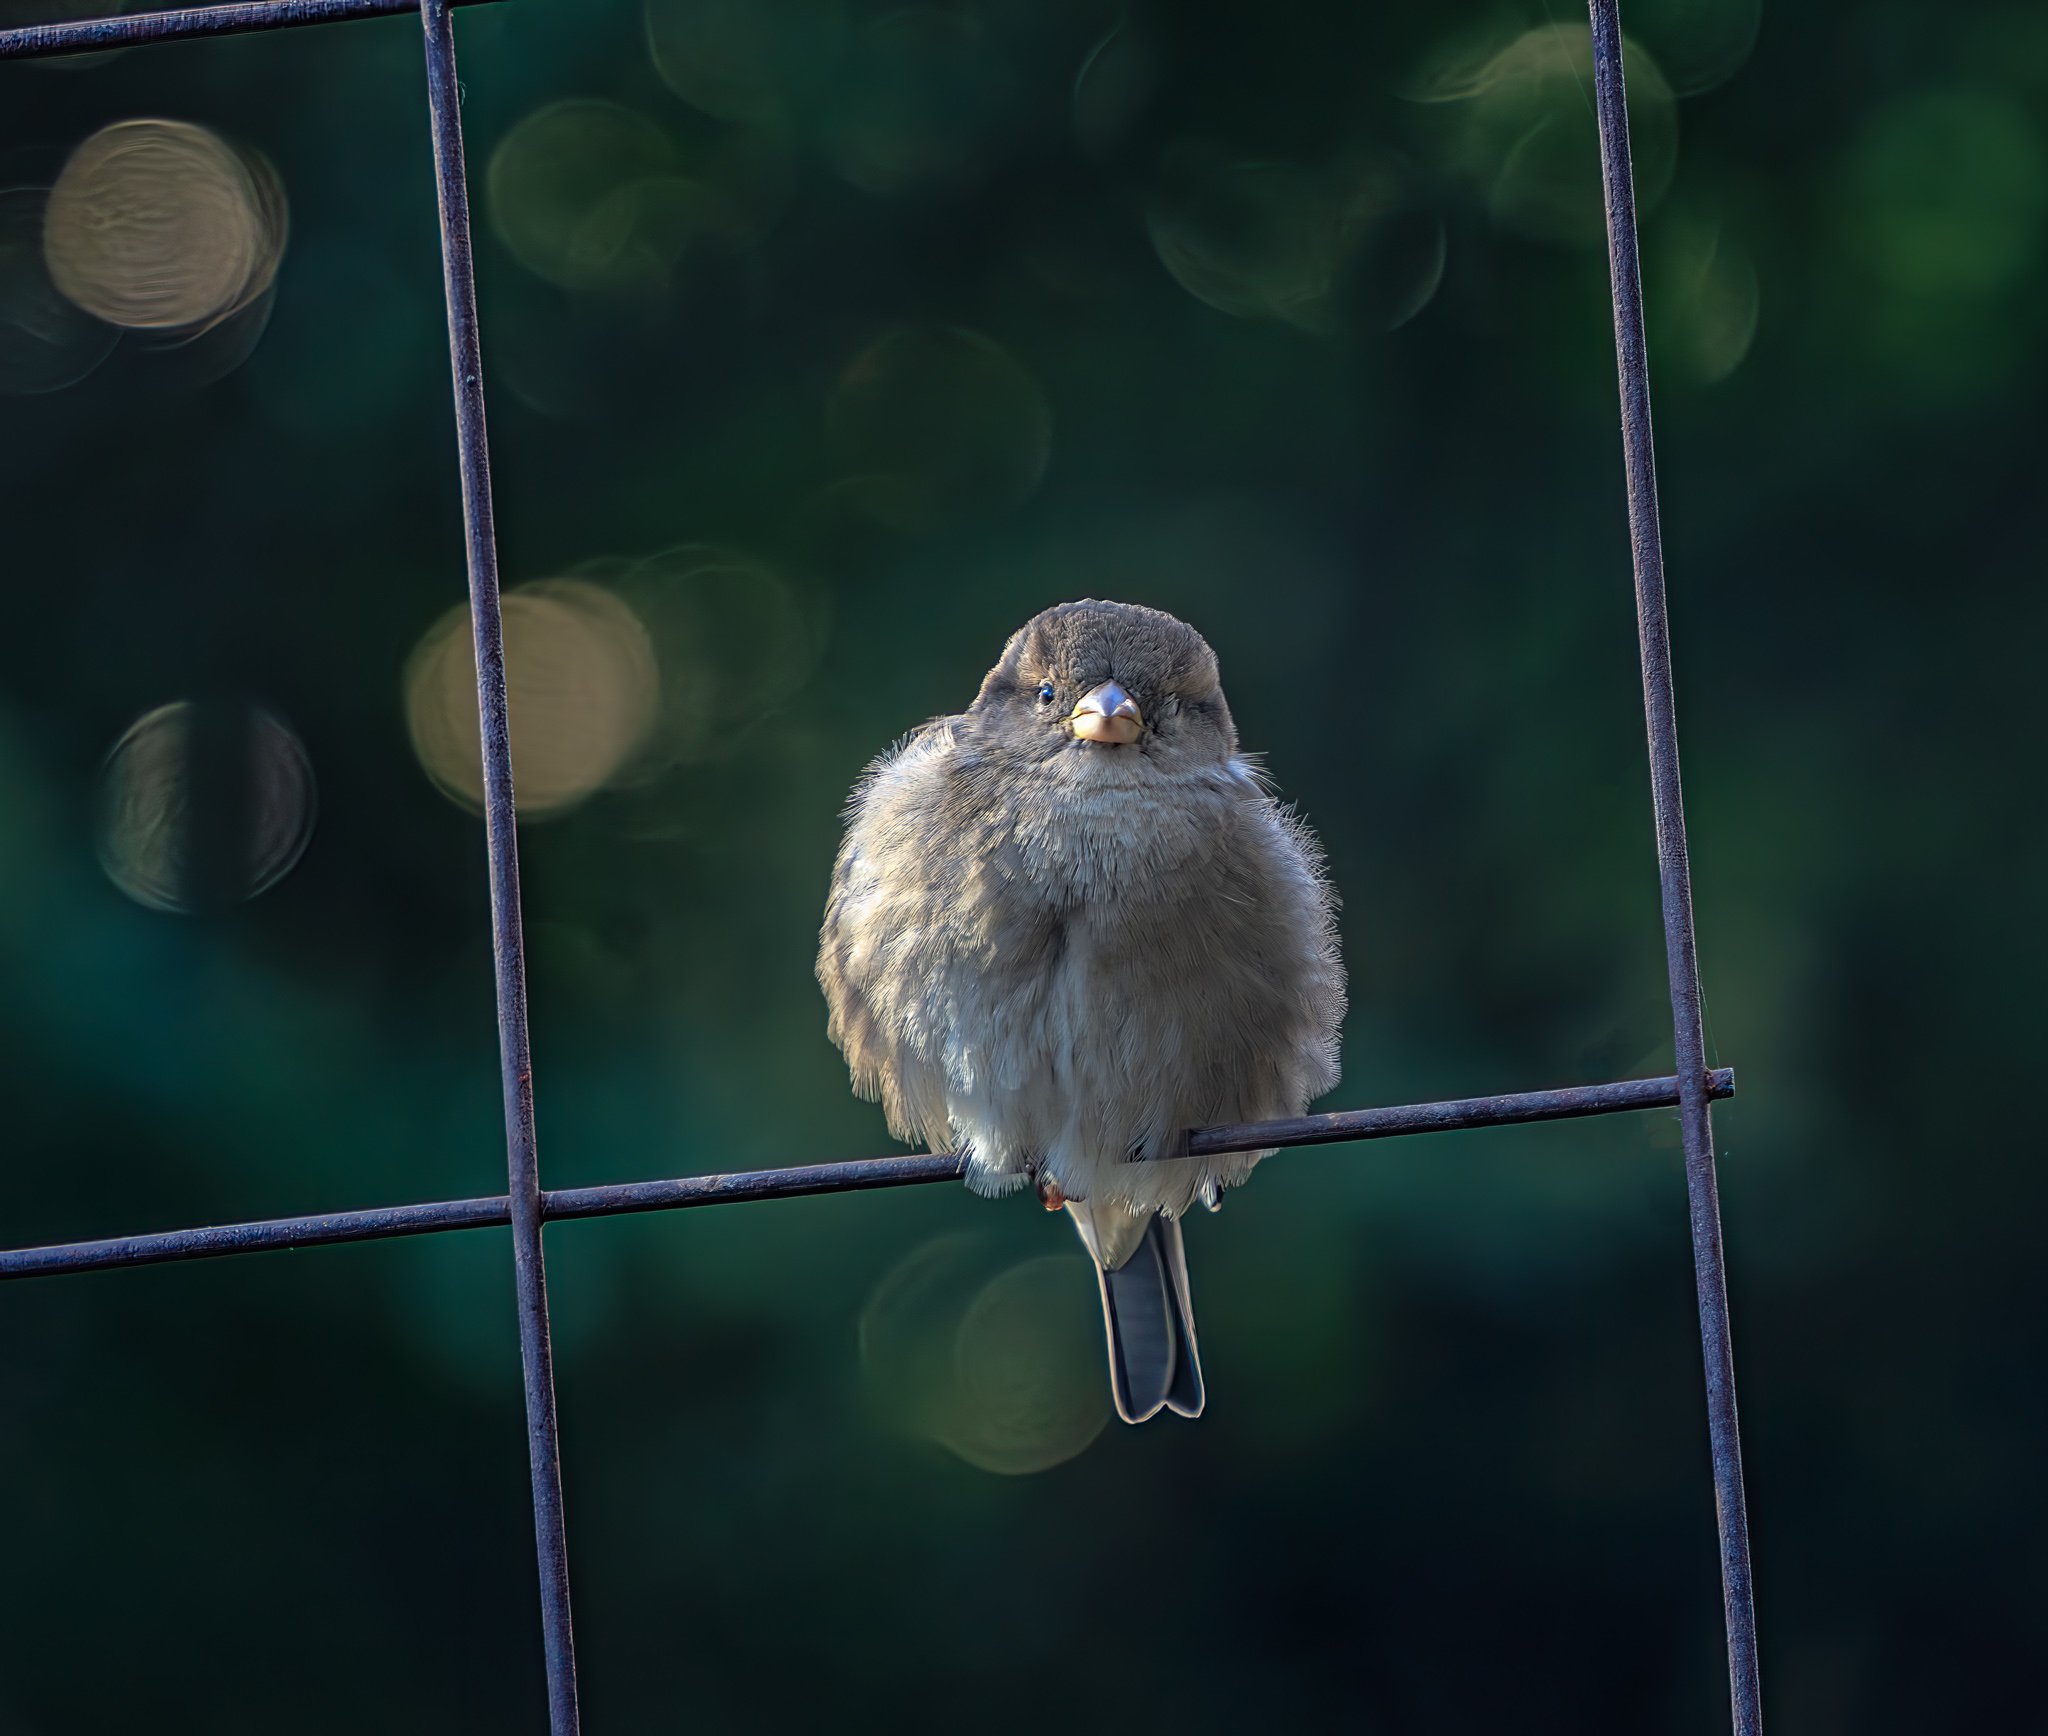 Look at this little guy.  Looks like he's winking at me.  He was just watching me from his perch in a pretty little park in Charlotte, NC.

#birding #sparrow #best_birds_of_ig #bestbirdshots #best_birds_photography #best_birds_of_world #your_buest_bi